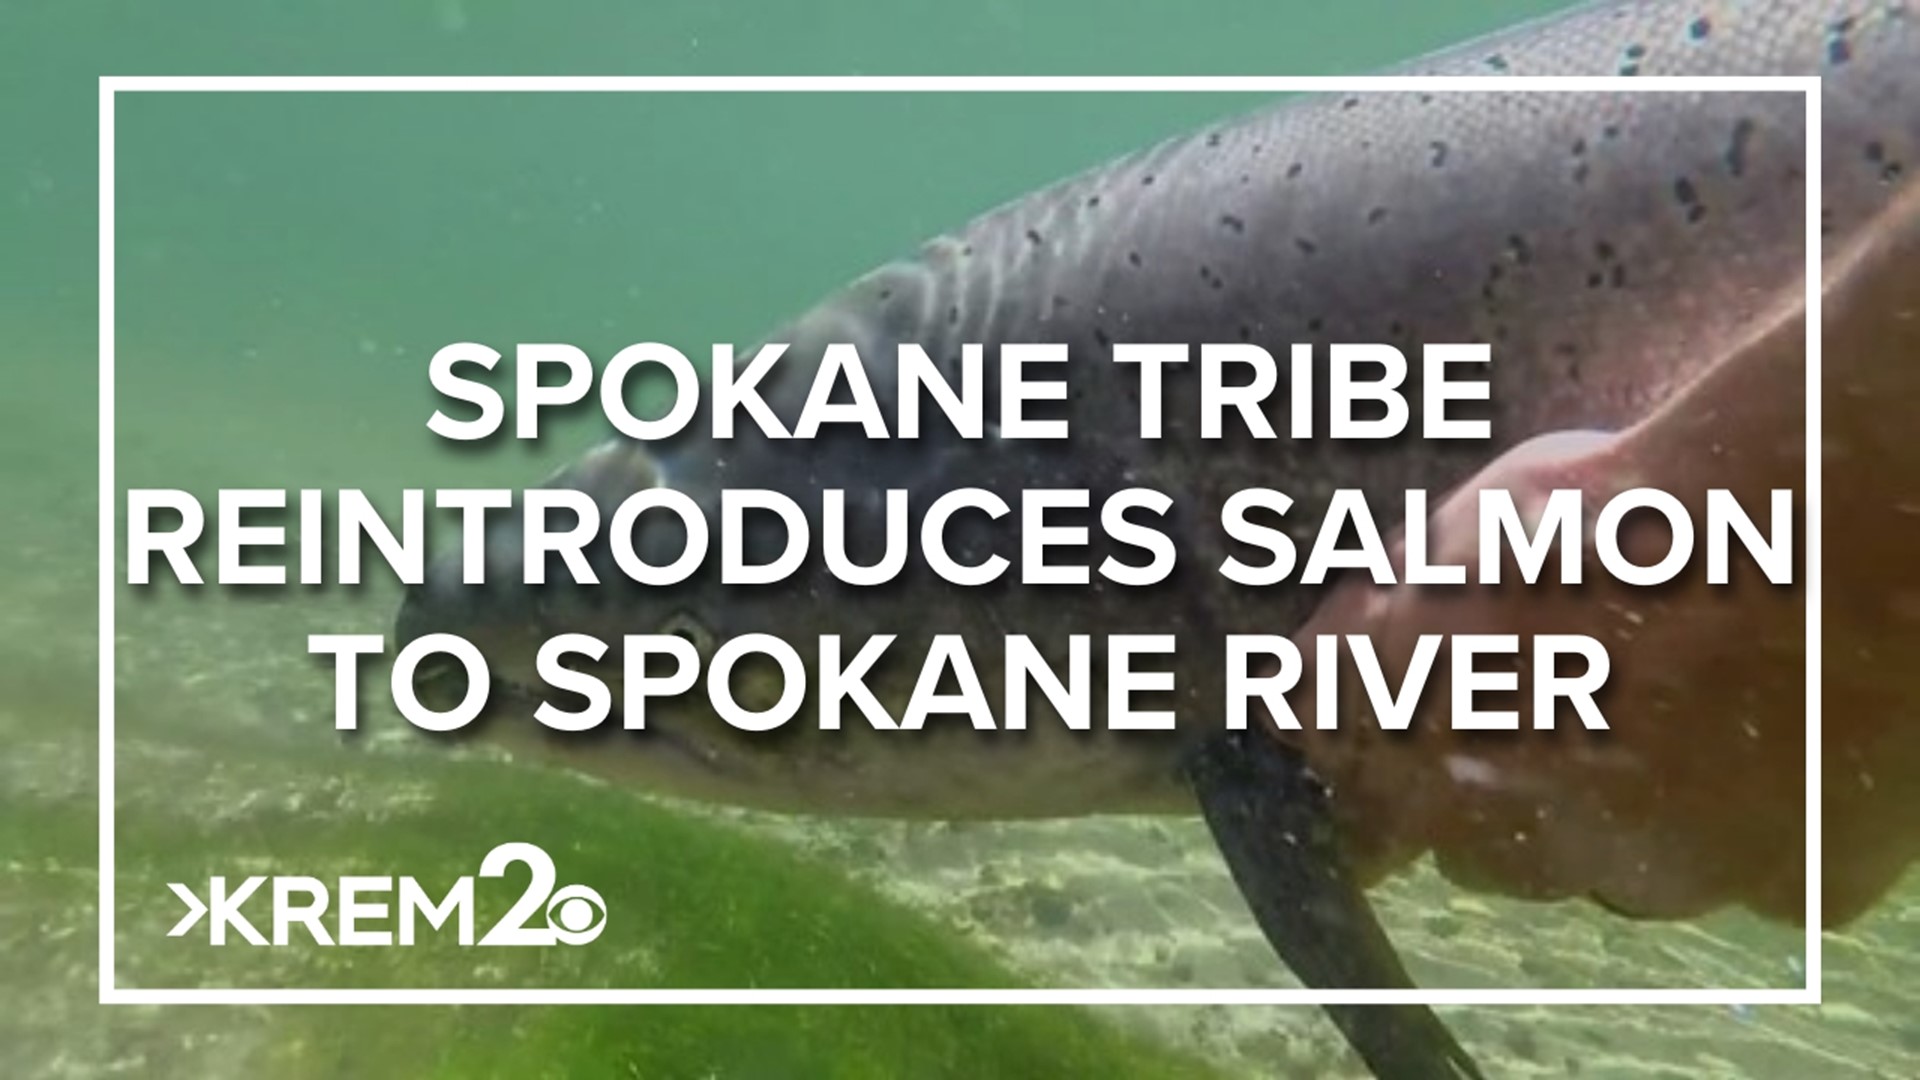 The release took place on the Glen Tana Farm, a 1,100-acre plot is under contract to be given to the Spokane Tribe & WA State Parks for salmon habitat restoration.